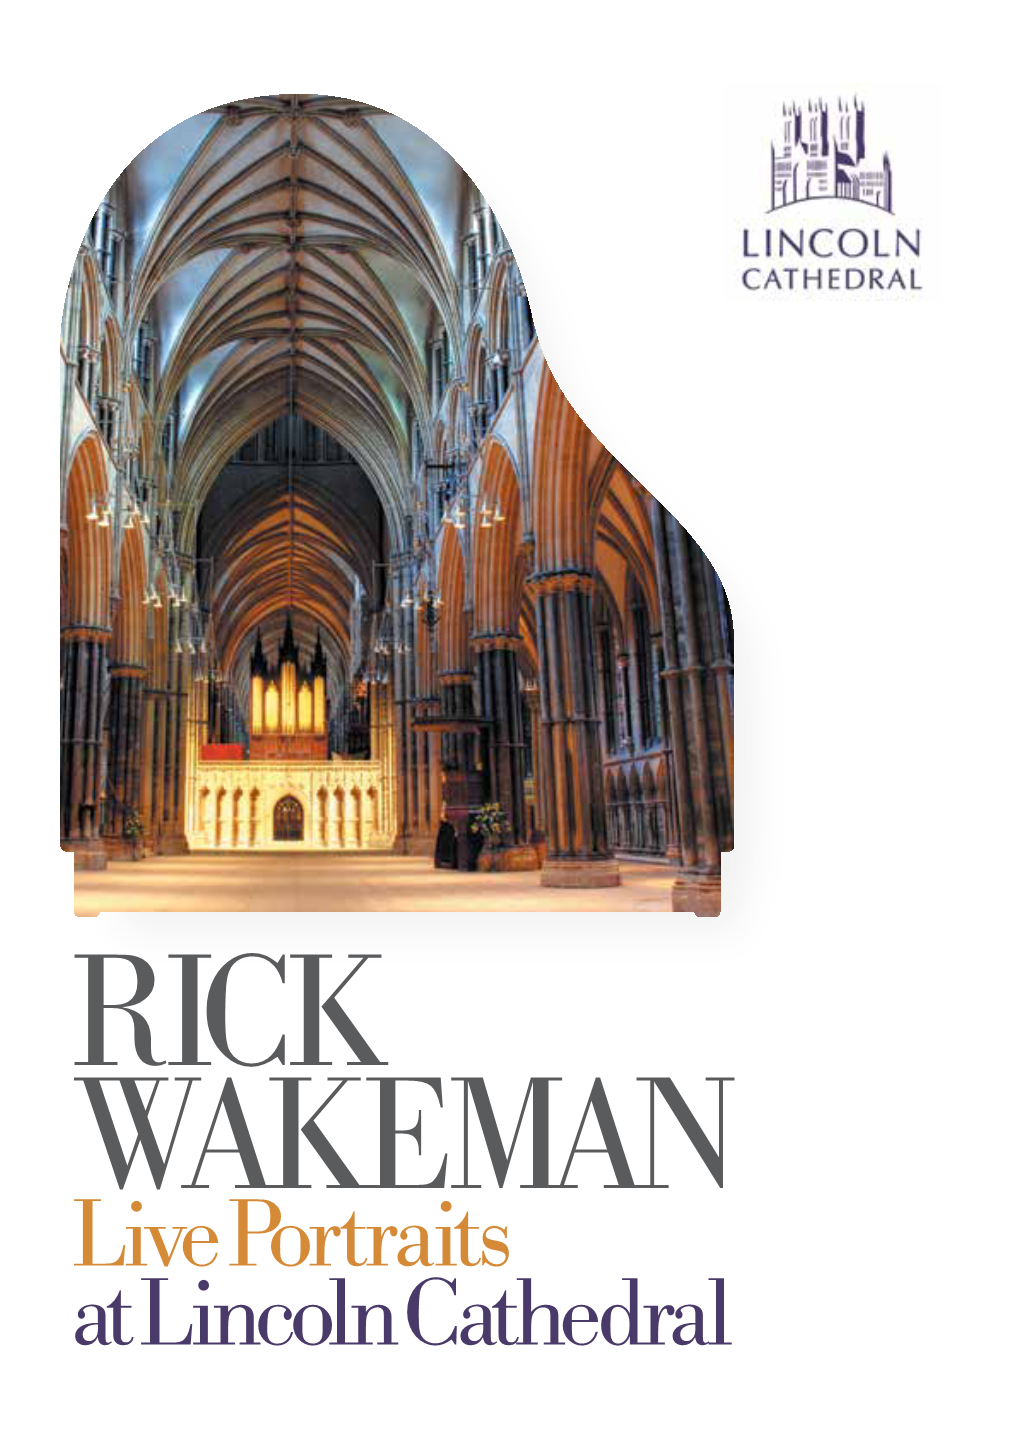 Piano Portraits Live at Lincoln Cathedral